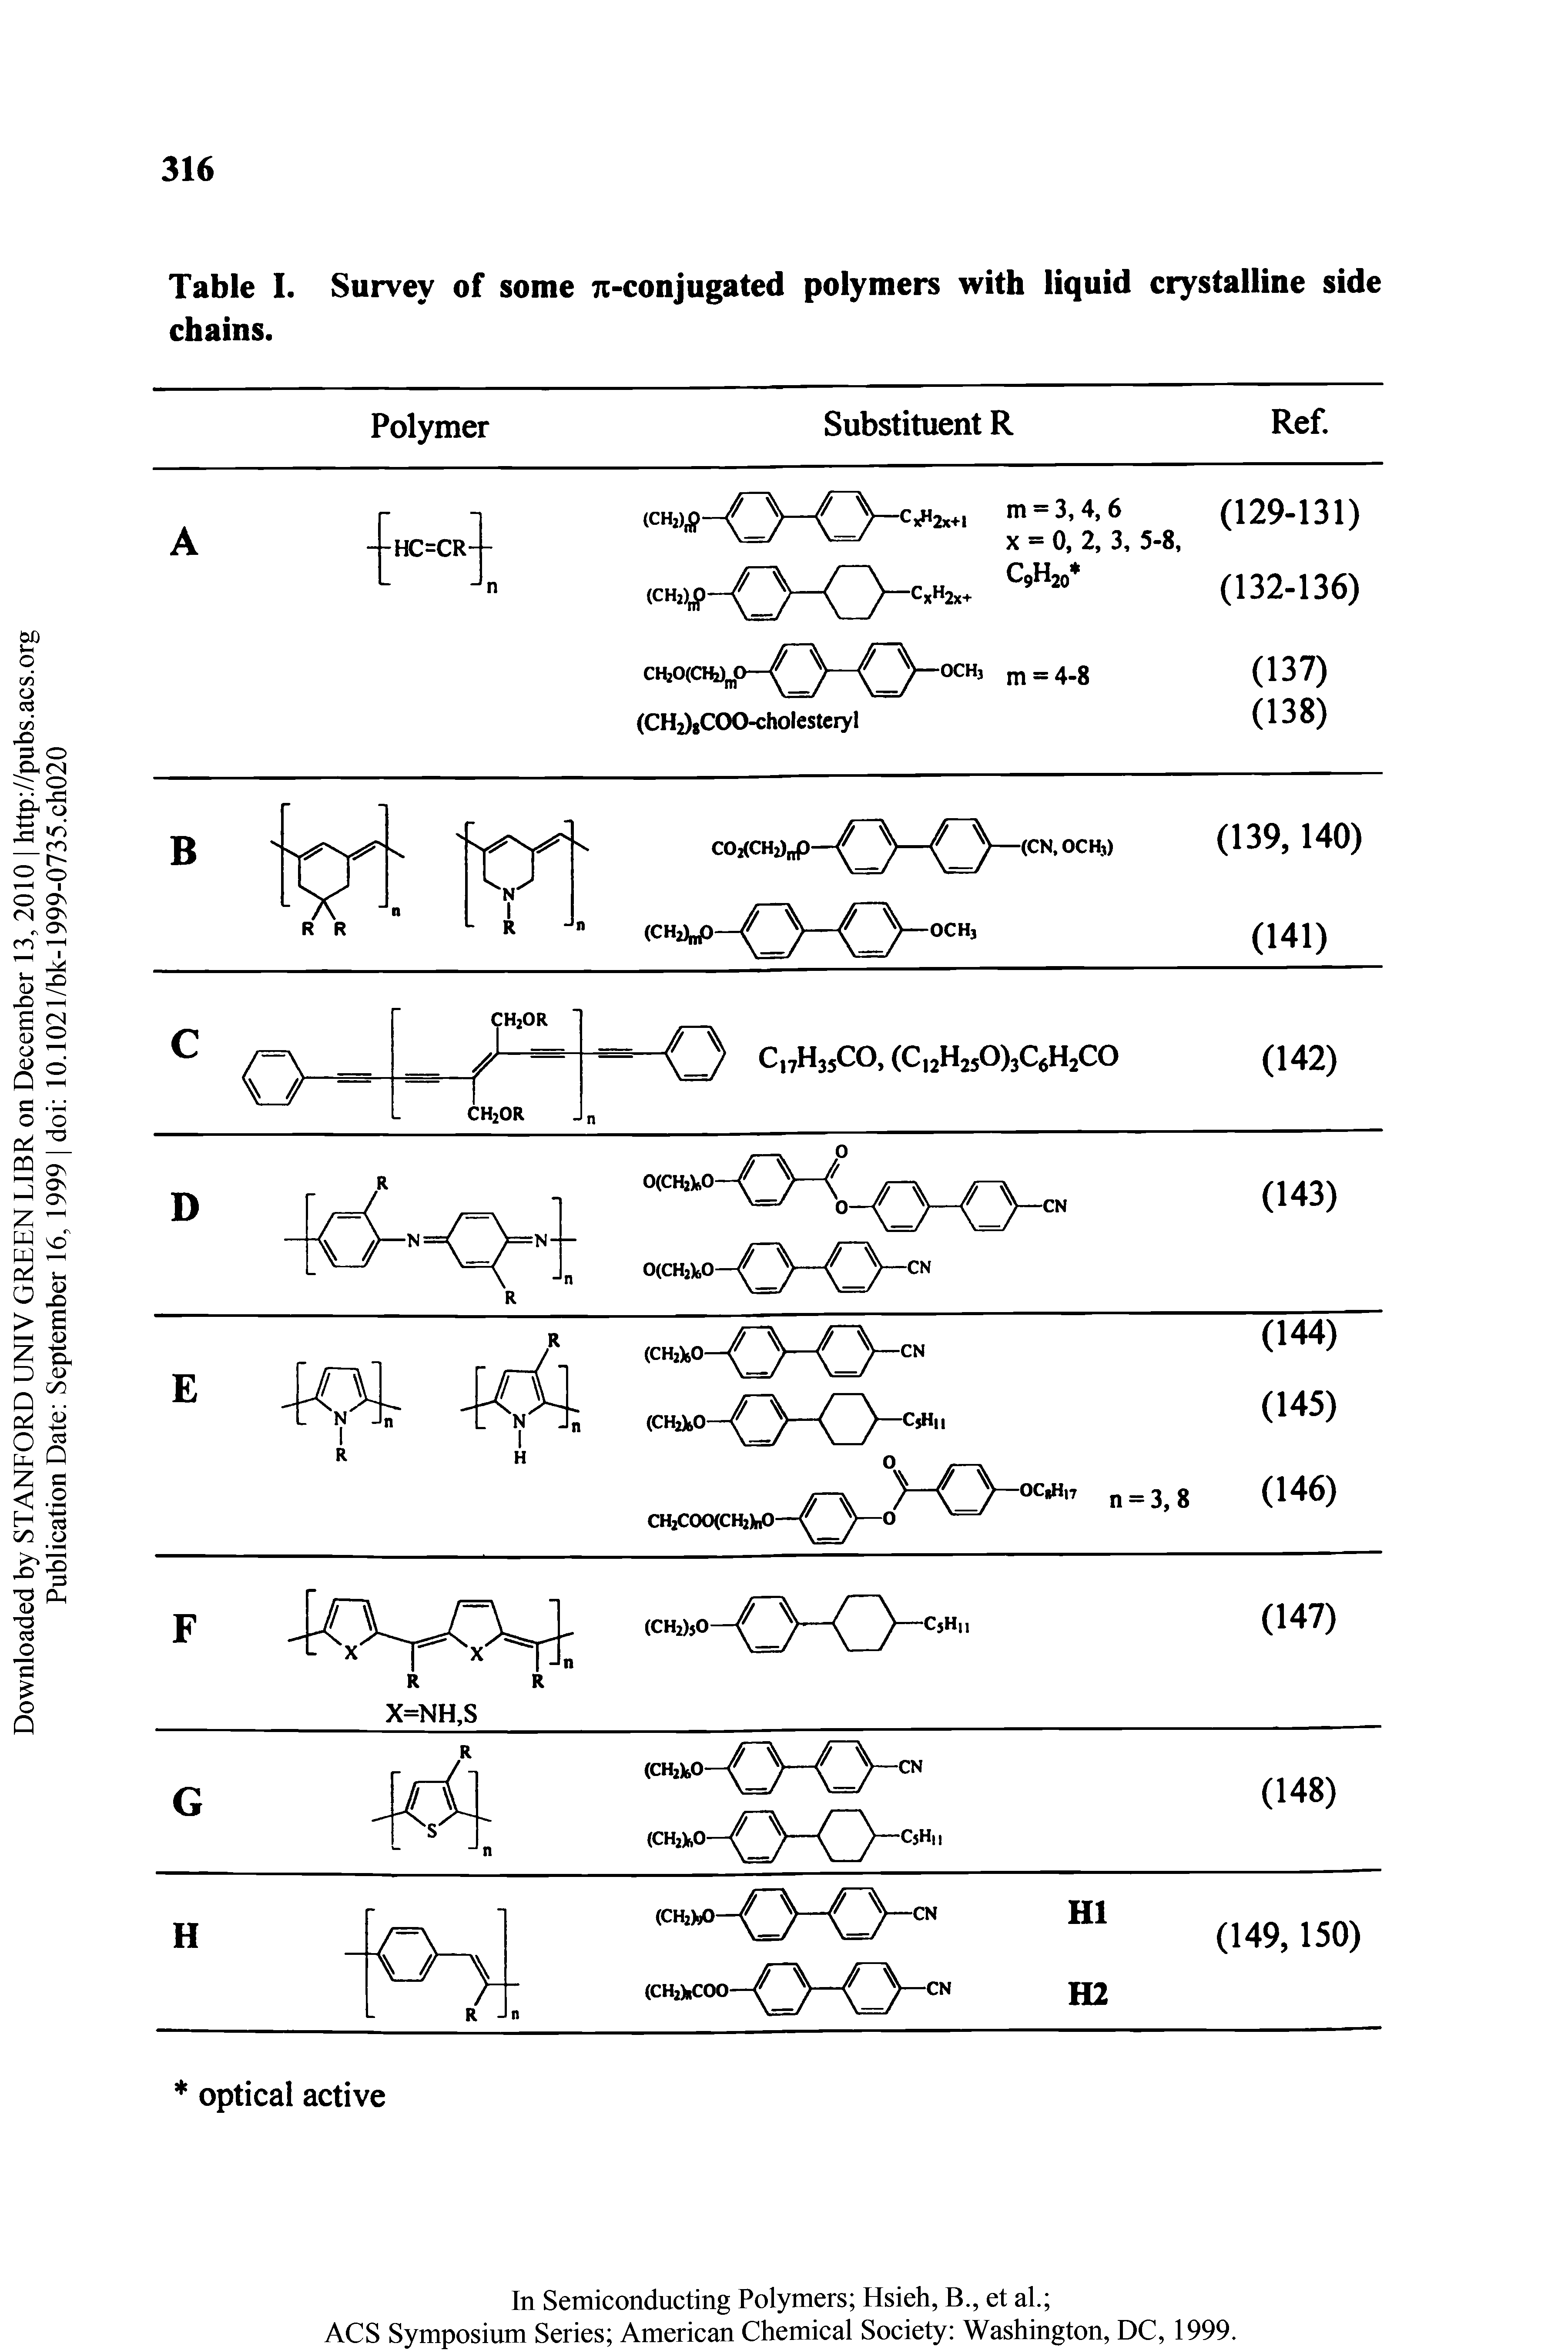 Table I. Survey of some n-conjugated polymers with liquid crystalline side chains.